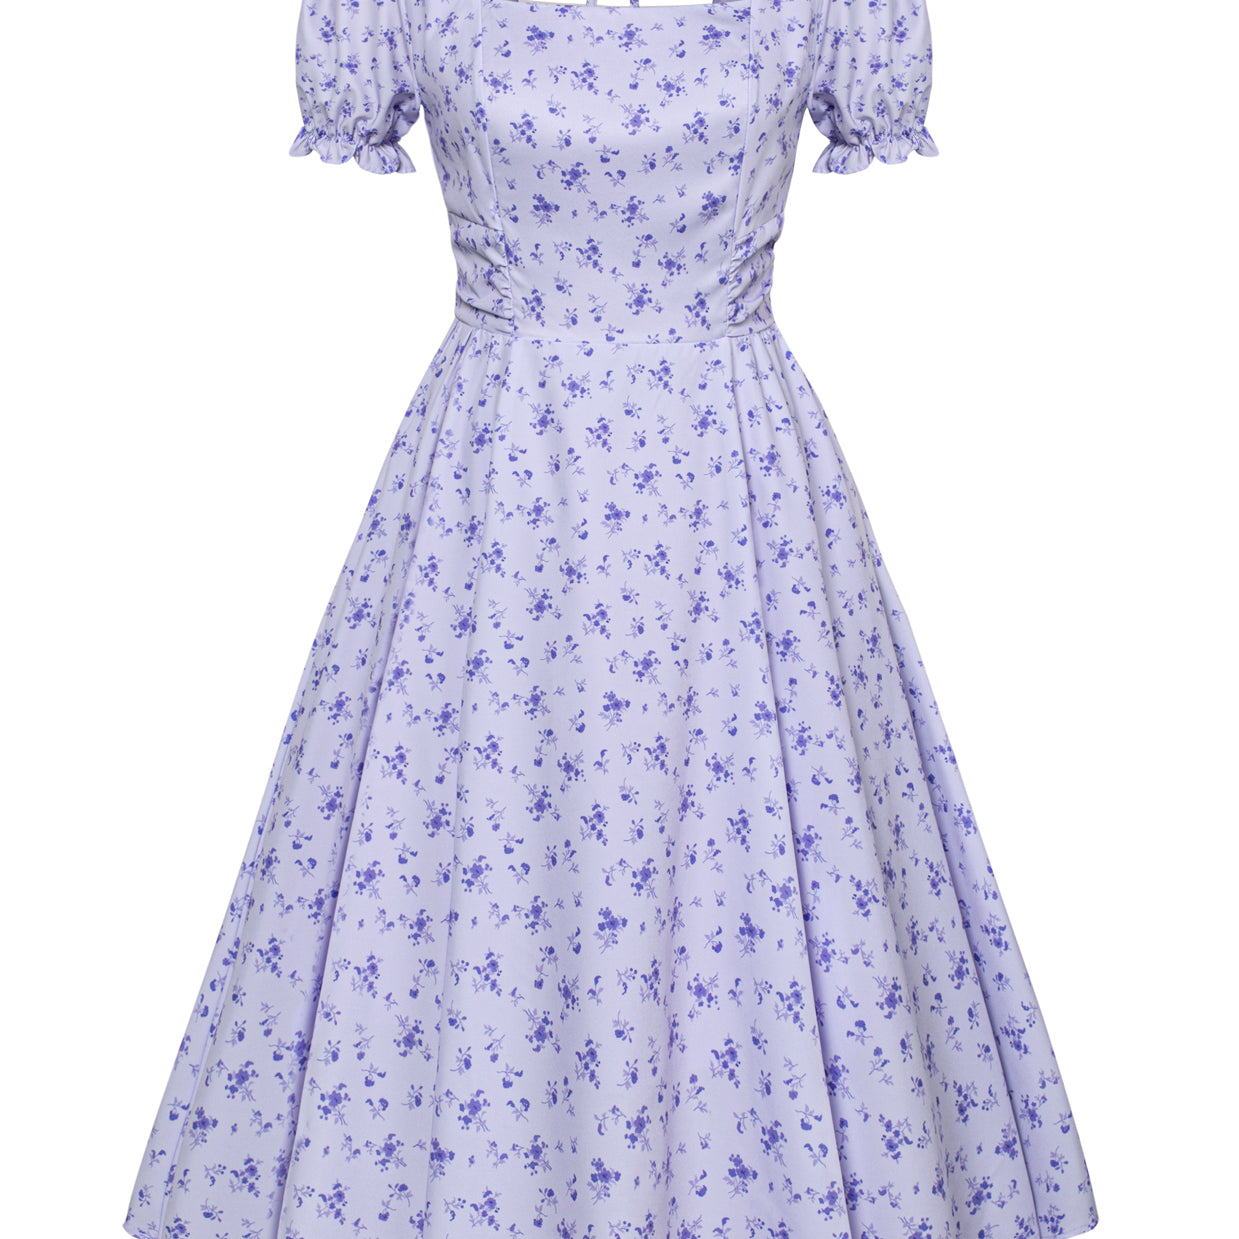 Vintage Daisy Flower Print Cottagecore Cocktail Dresses Square Neck Puff Sleeve Dress with Pockets